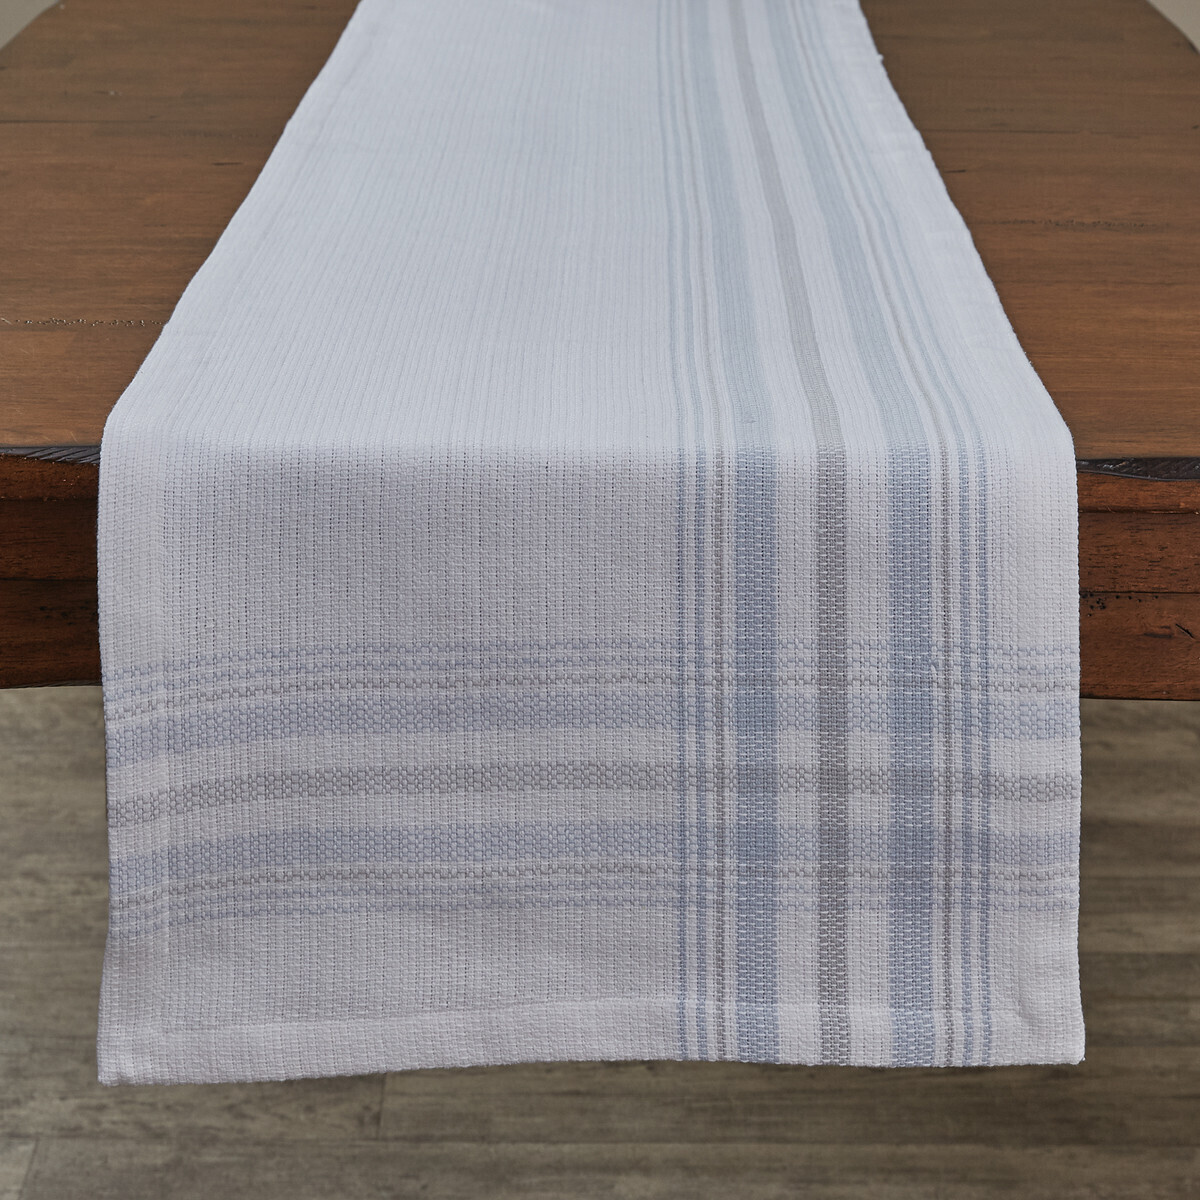 French Chic Table Runner, 72"